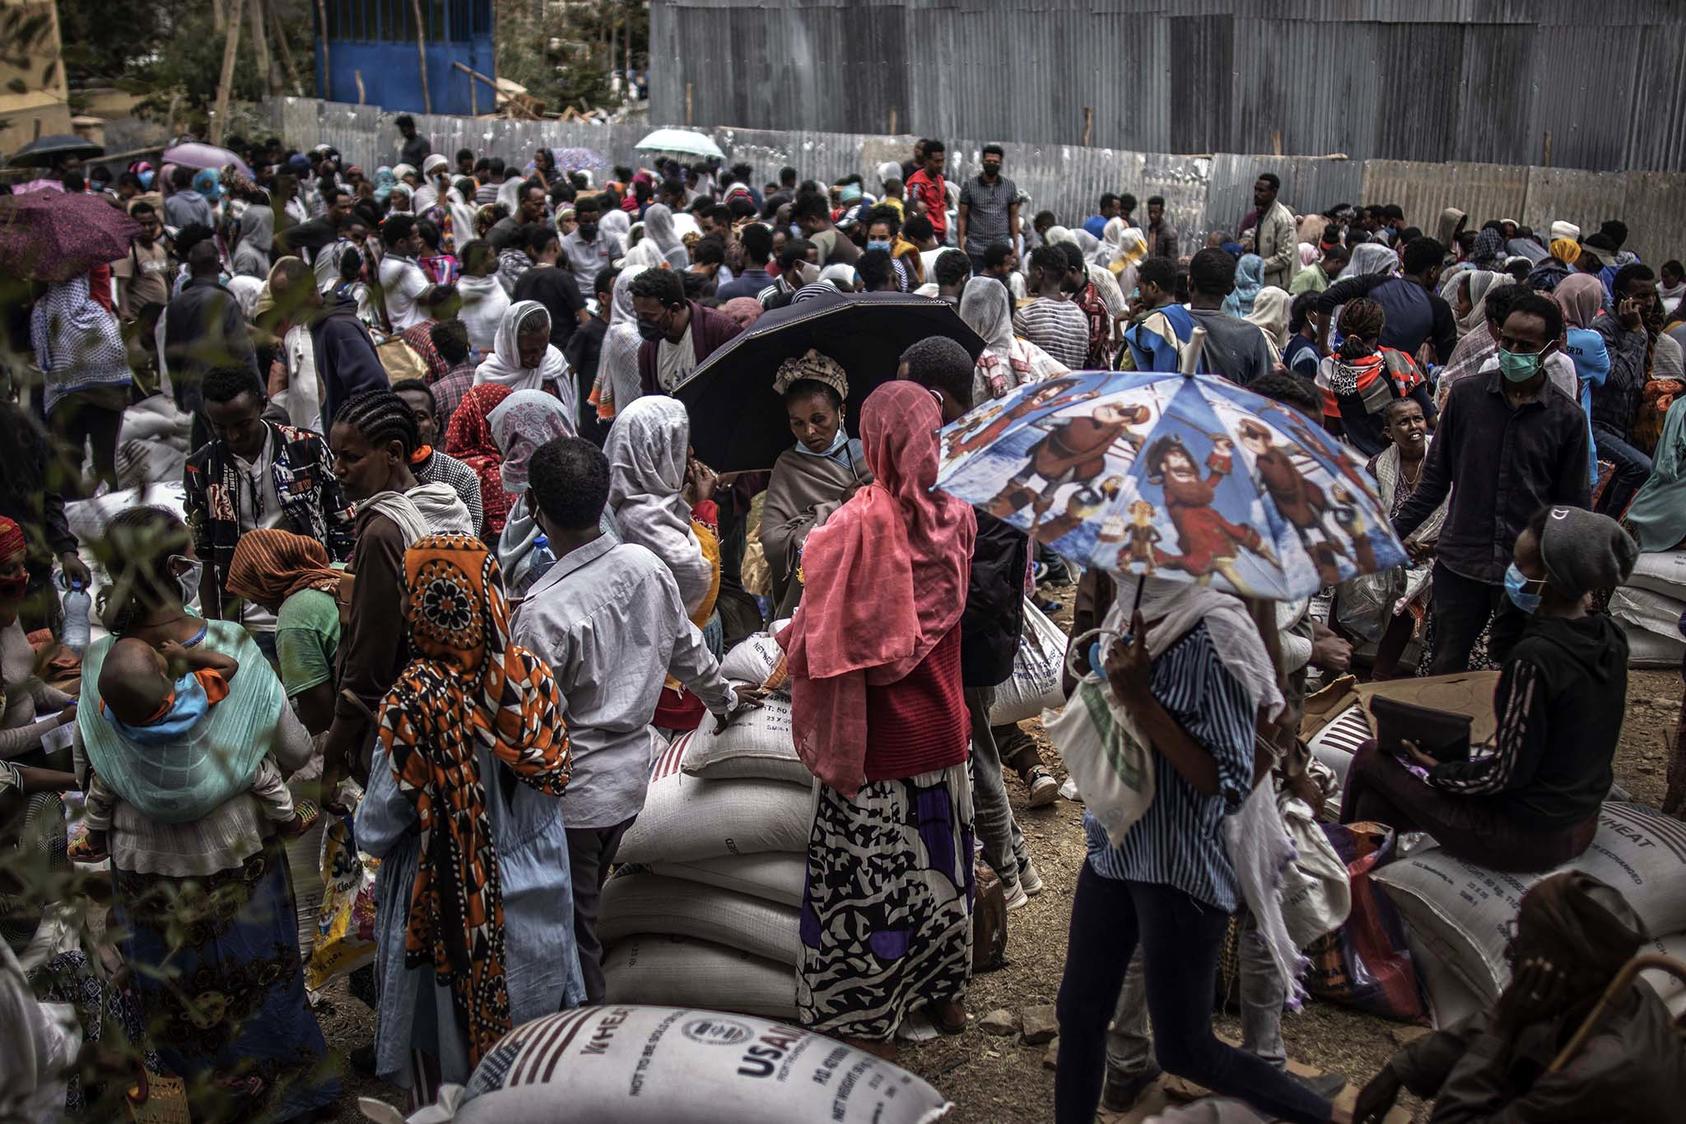 Hundreds of people seek emergency food rations June 26 in Tigray’s capital, Mekelle. To increase food deliveries and prevent starvation deaths among as many as 900,000 people at risk, an effective cease-fire is vital. (Finbarr O'Reilly/The New York Times)